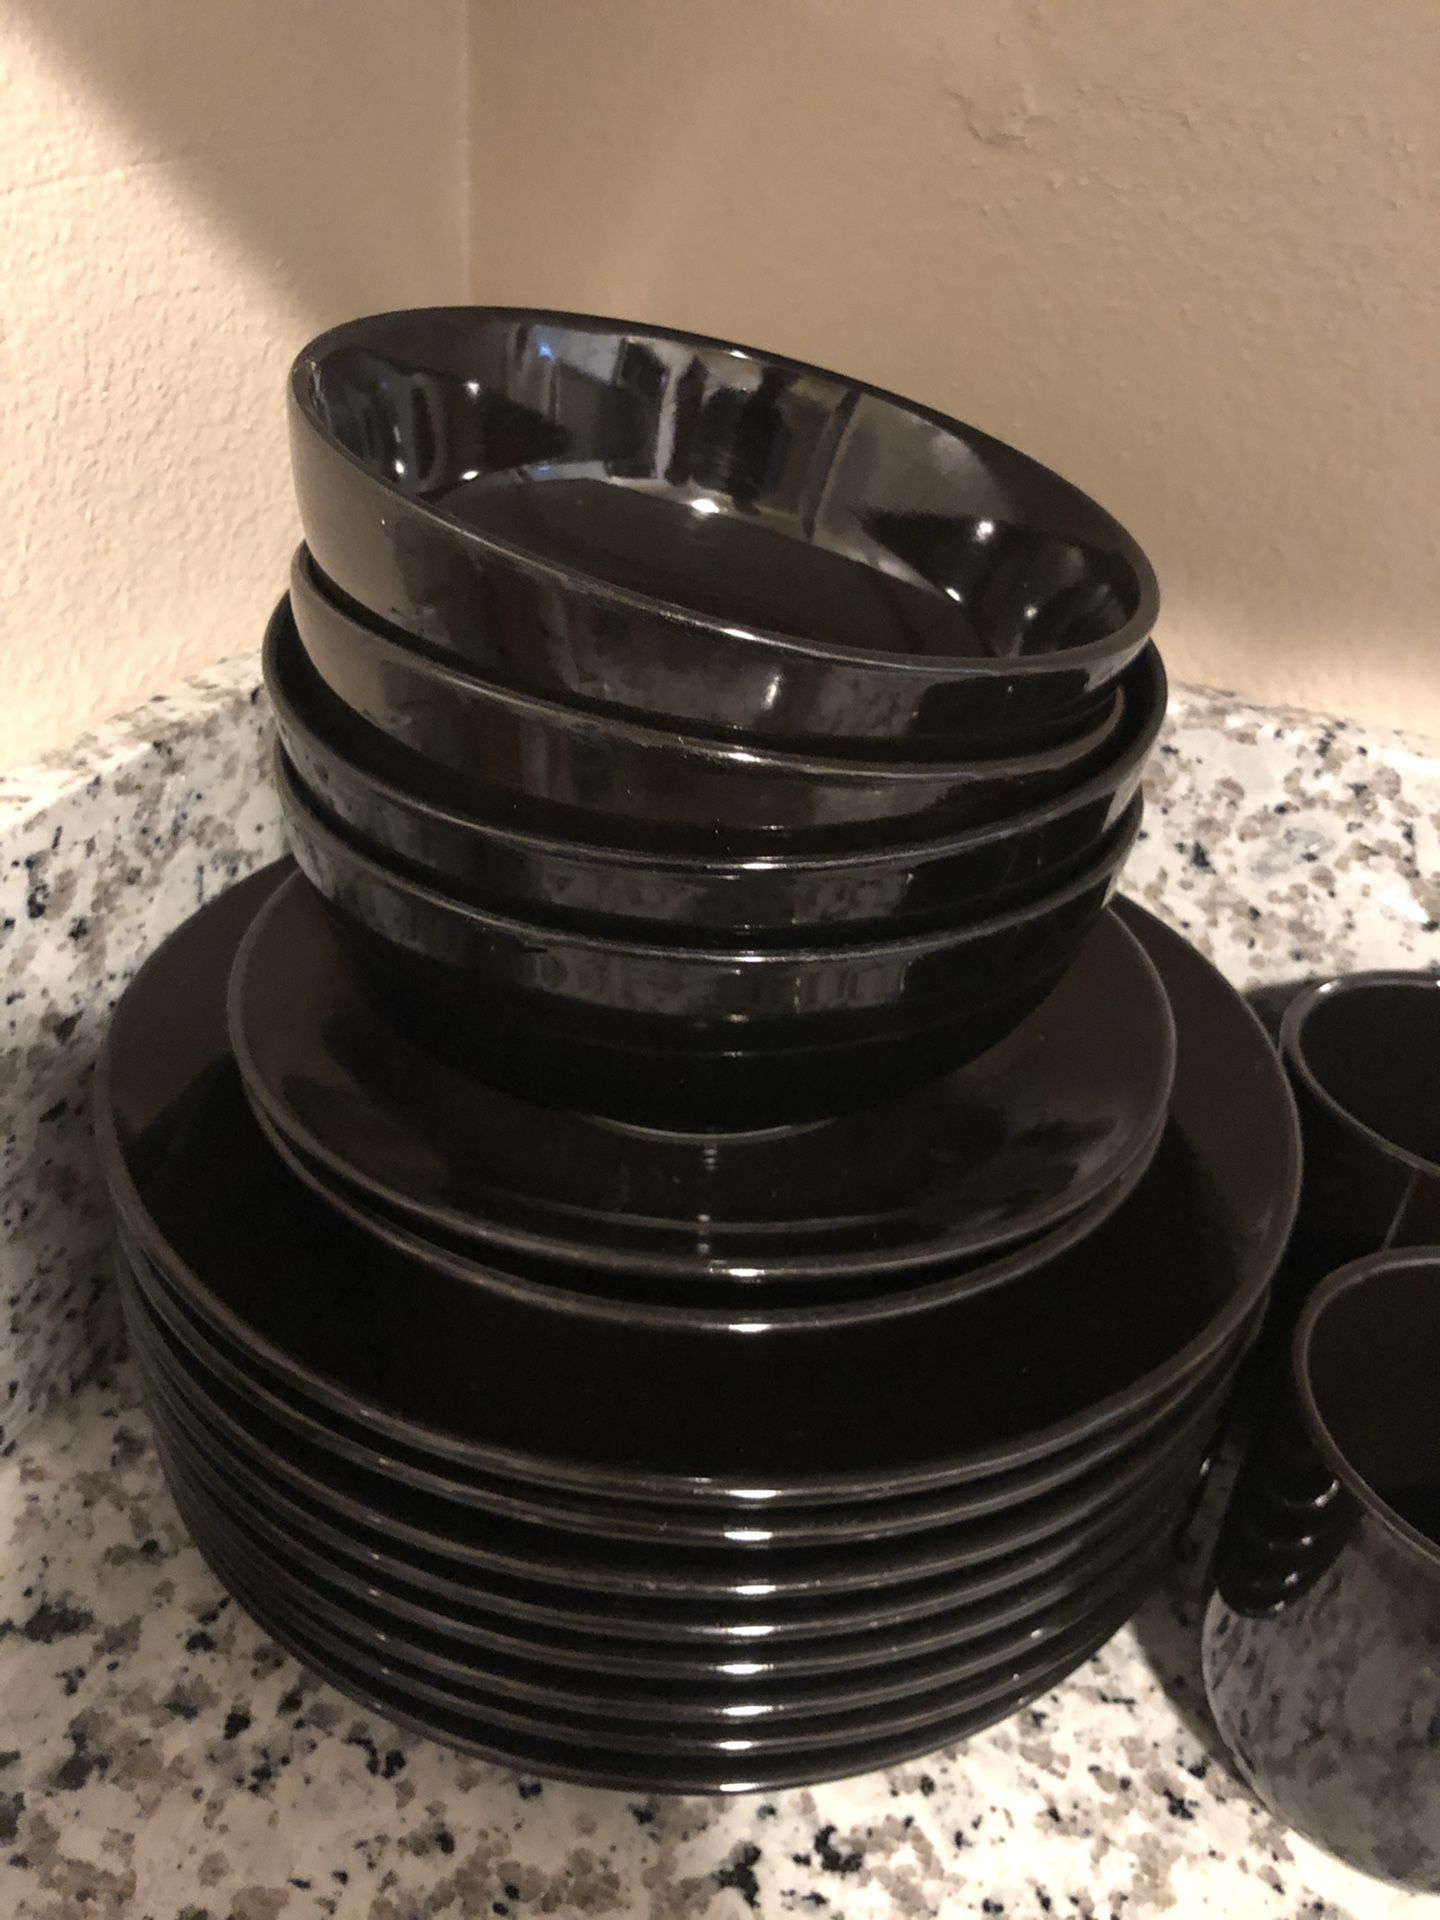 Plates, bowls and cups